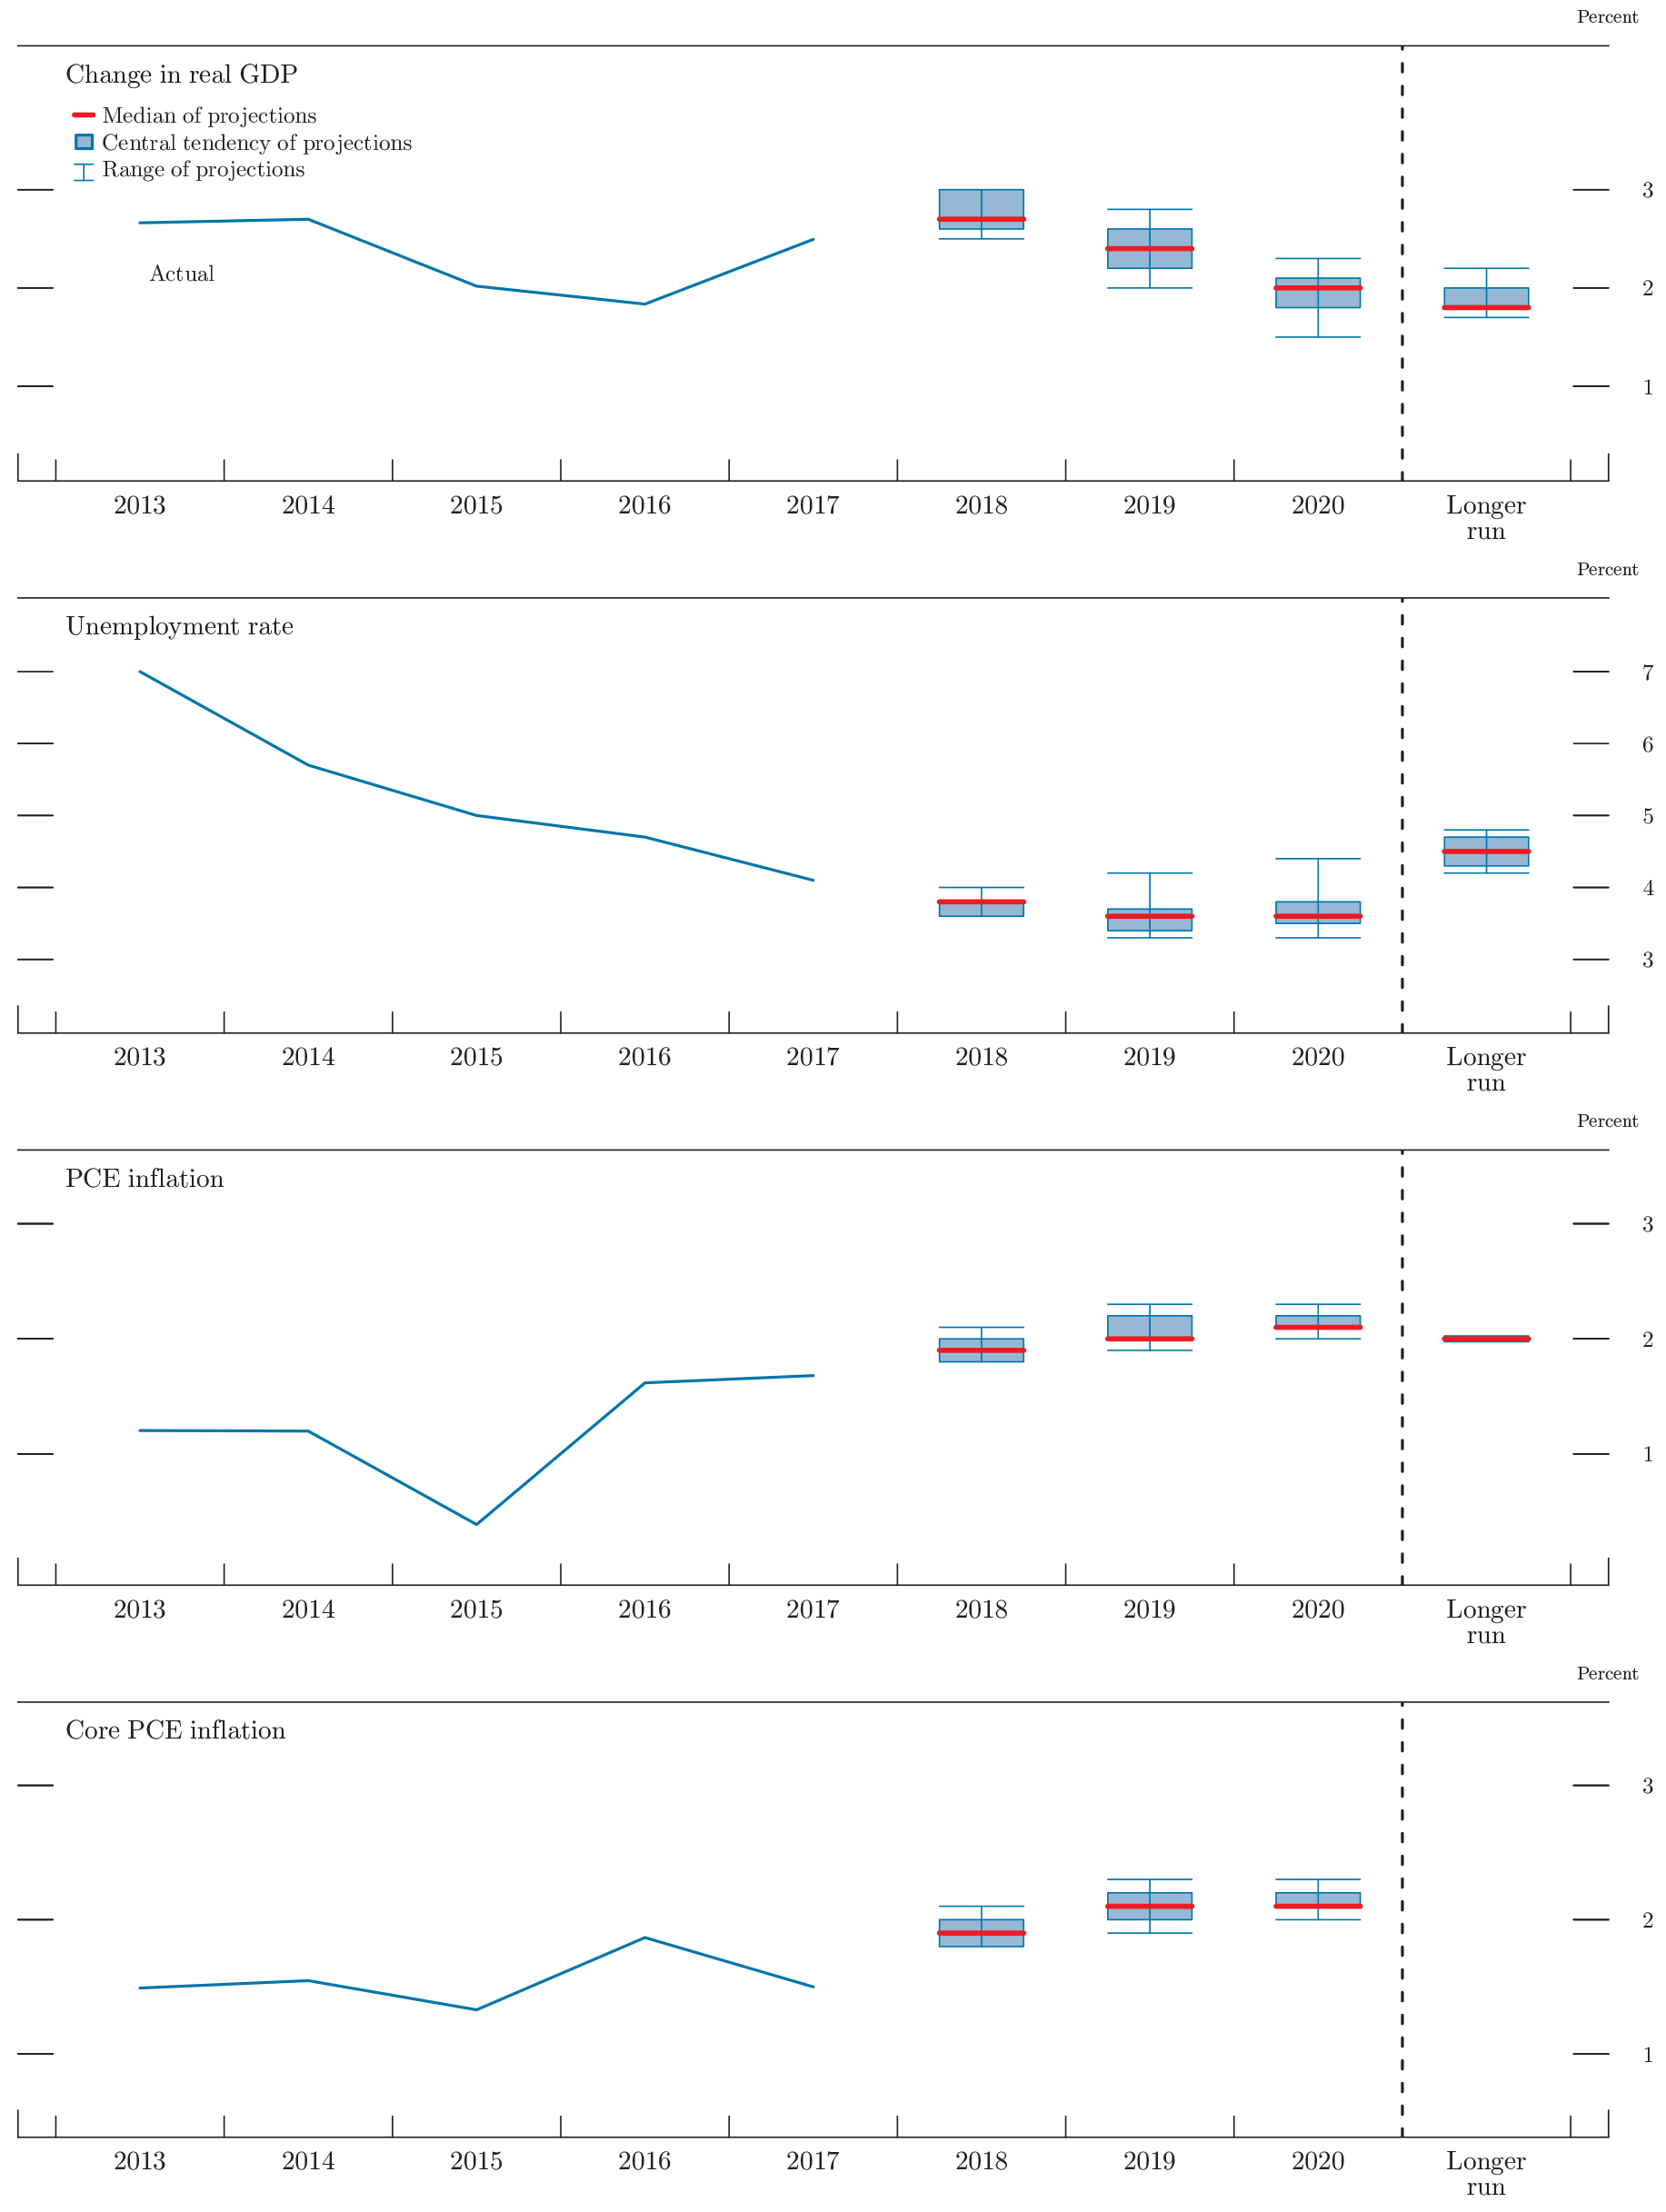 Figure 1. Medians, central tendencies, and ranges of economic projections, 2018-20 and over the longer run. See accessible link for data.